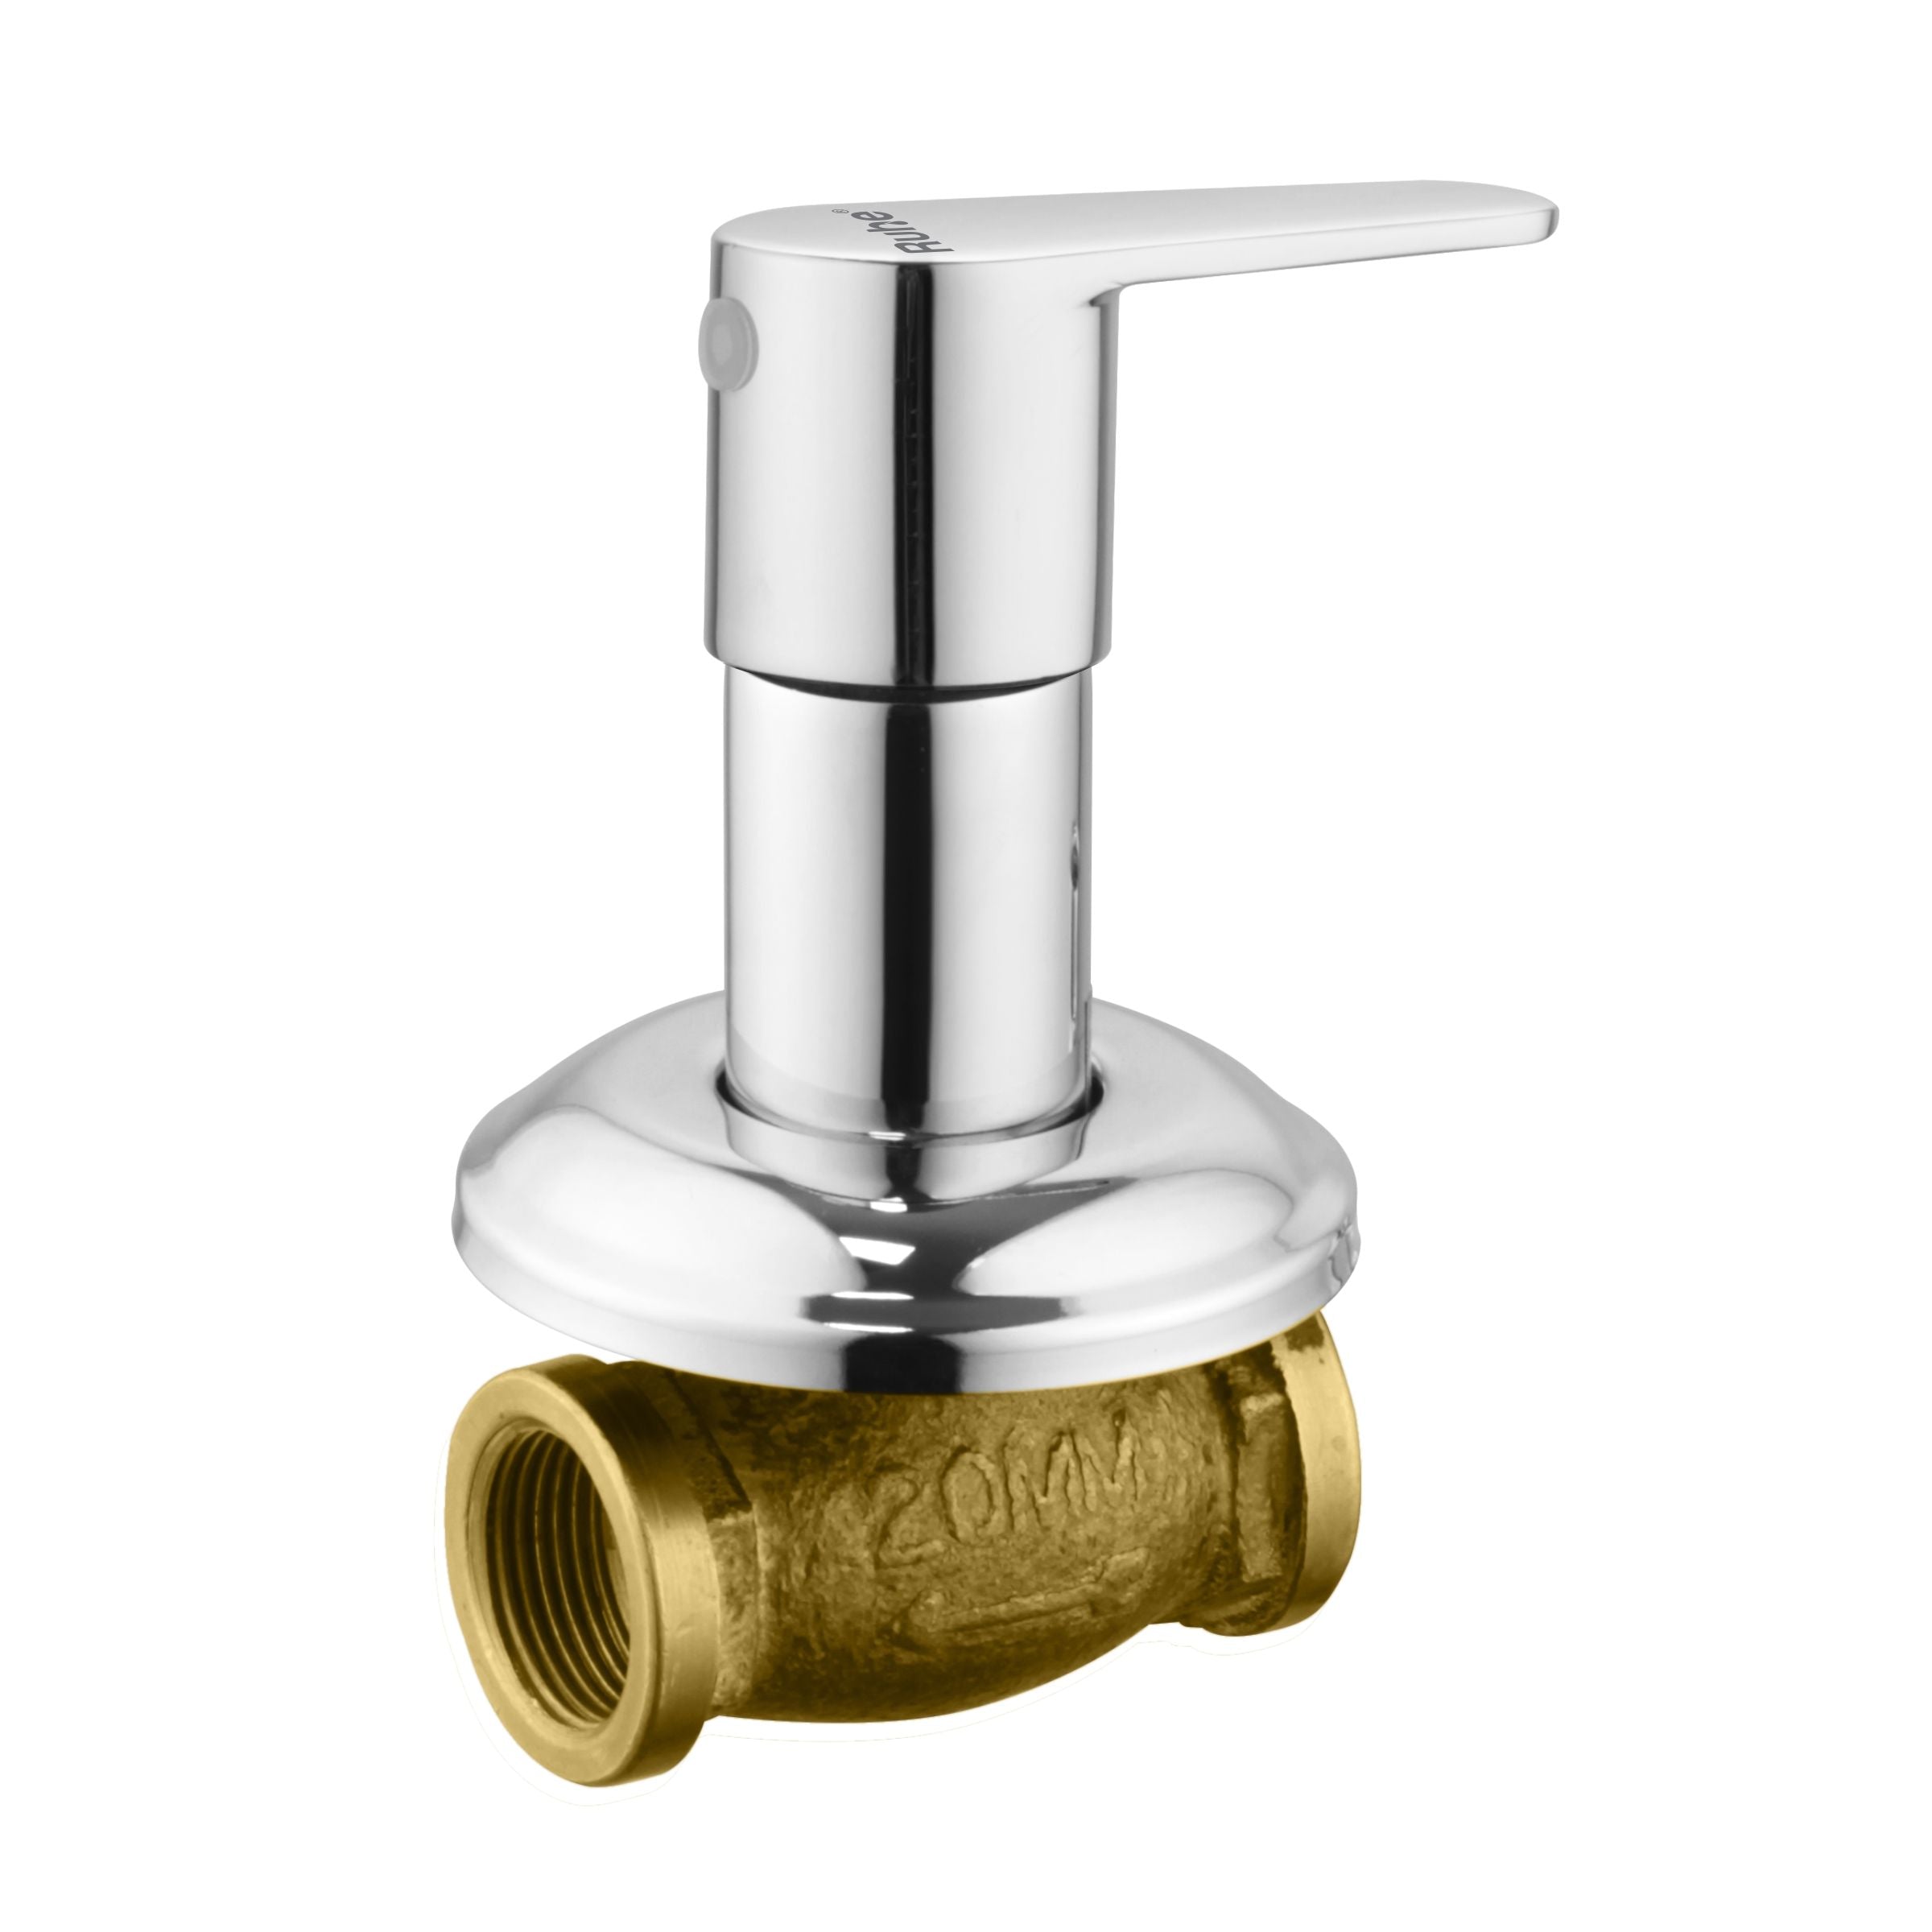 Eclipse Concealed Stop Valve Brass Faucet (20mm)